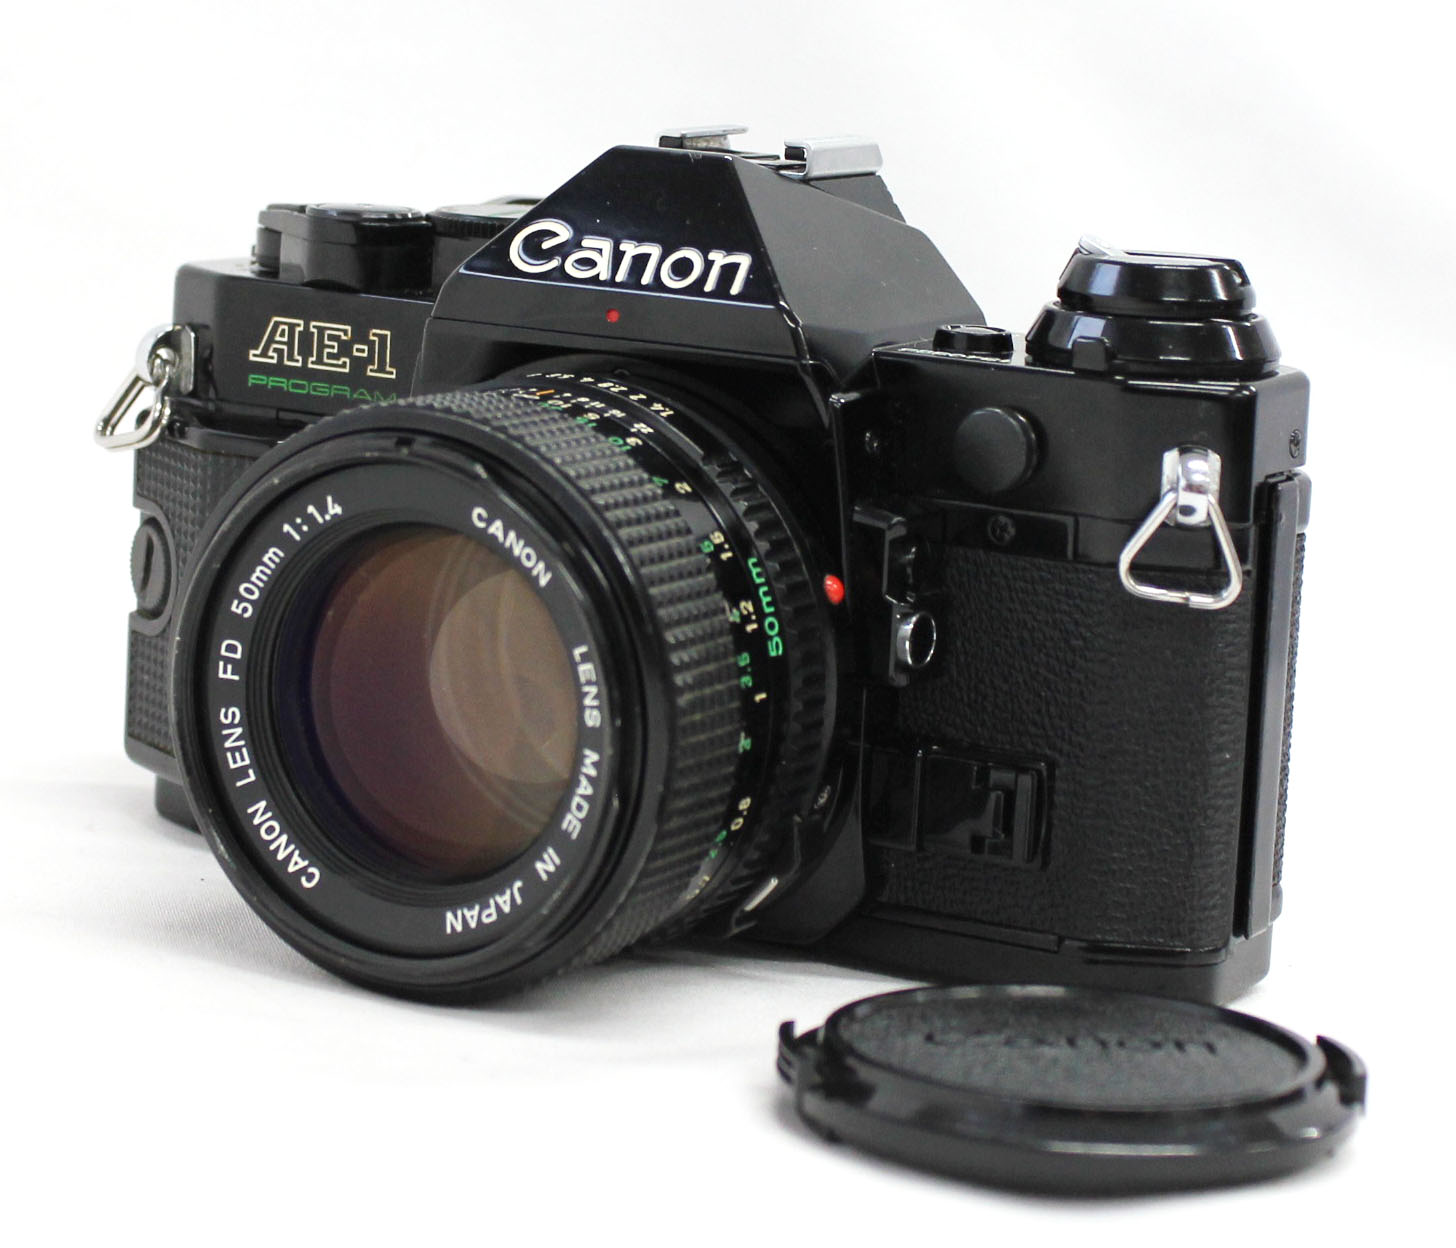 Japan Used Camera Shop | Canon AE-1 Program 35mm SLR Film Camera Black with New FD NFD 50mm F/1.4 Lens from Japan